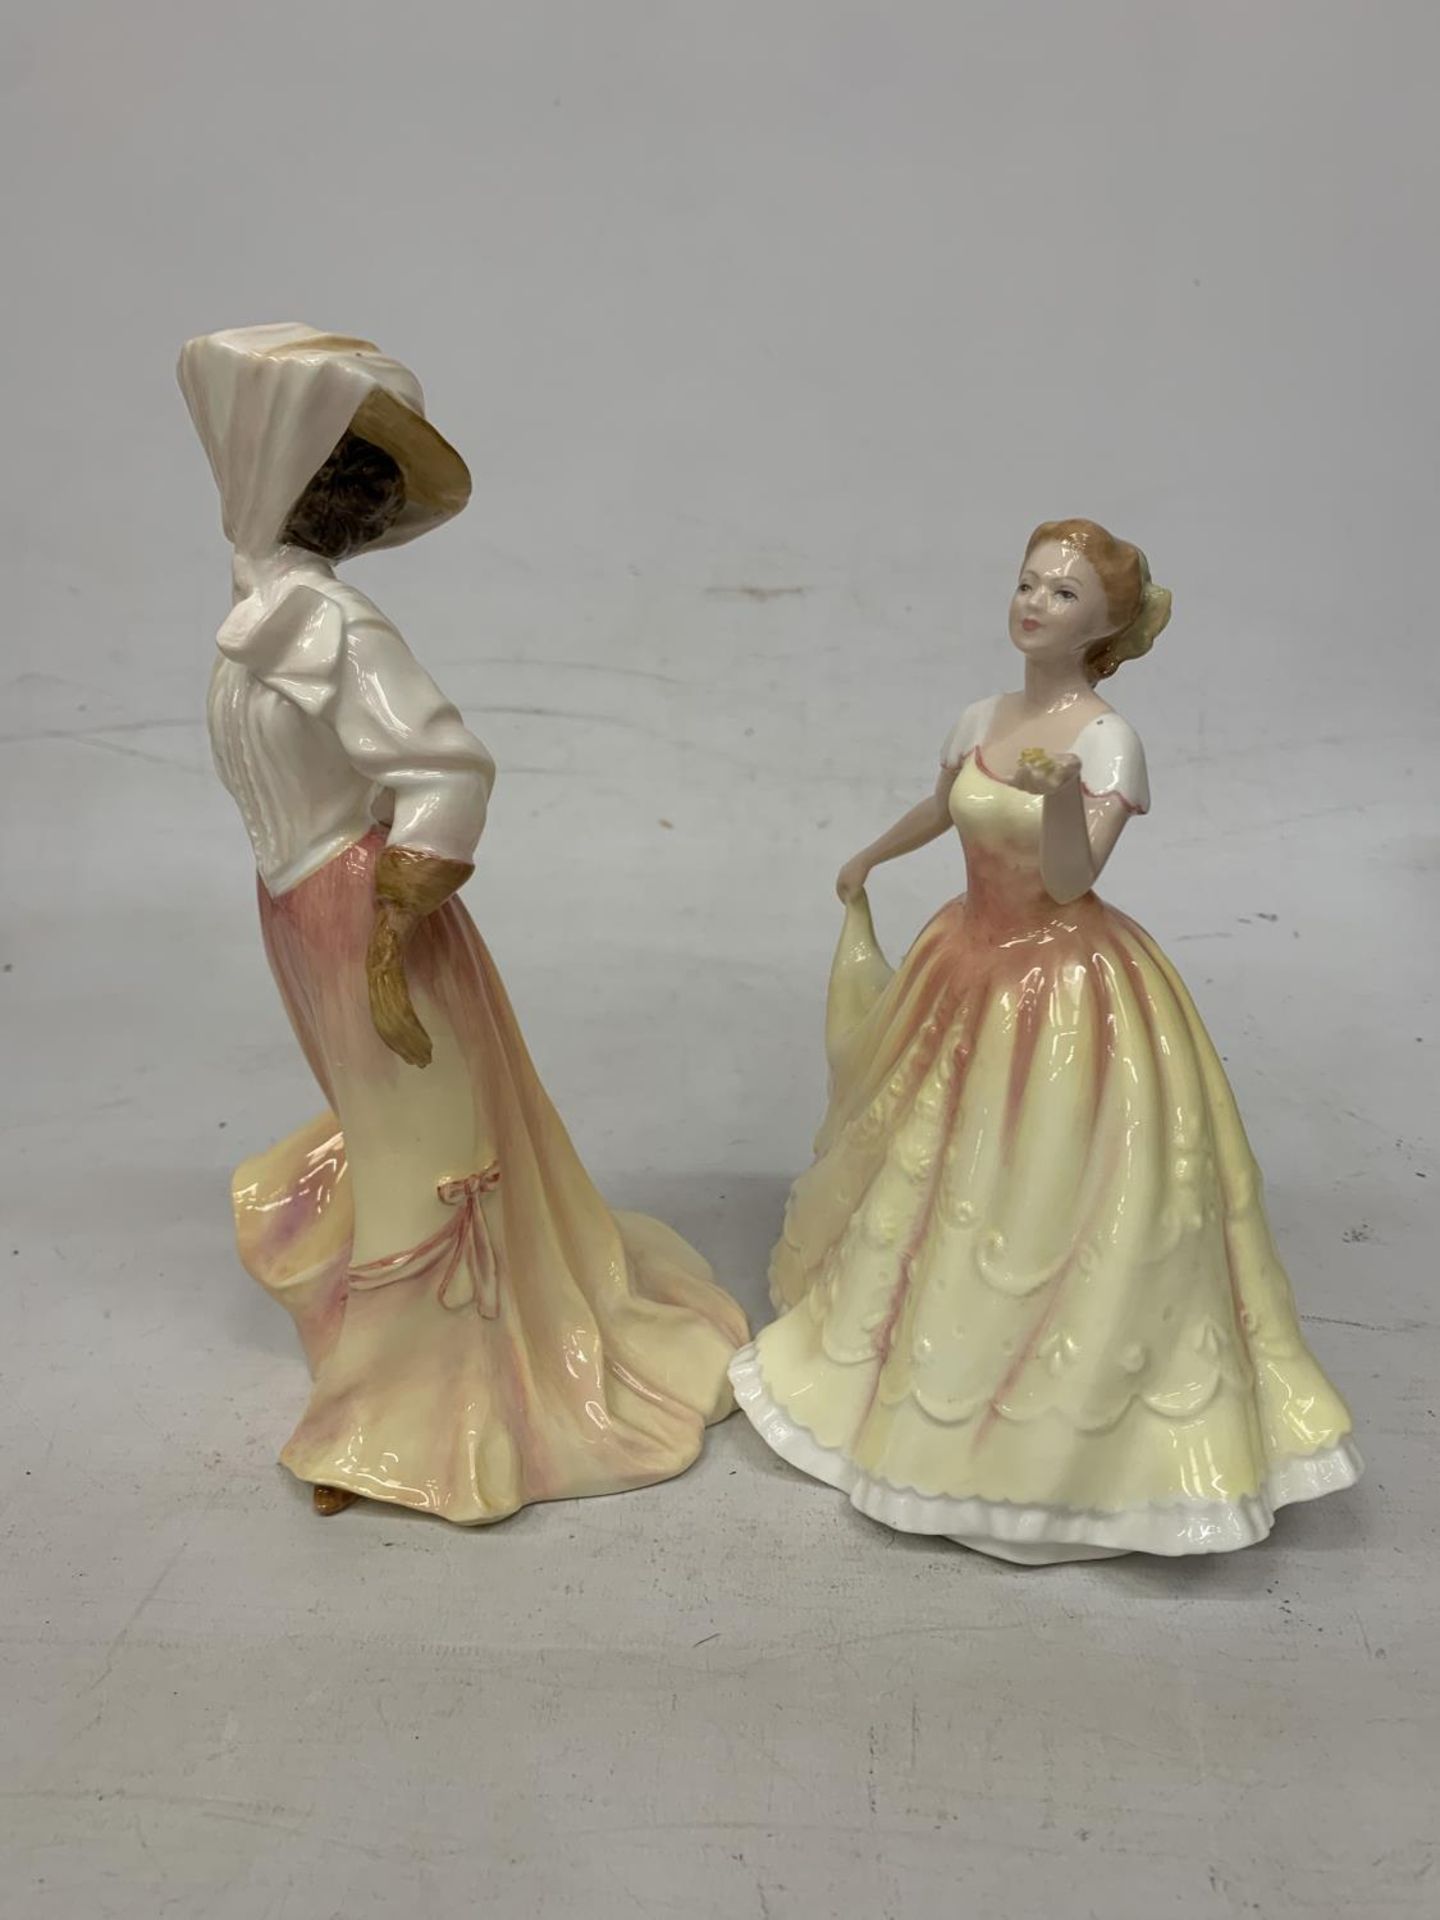 TWO ROYAL DOULTON FIGURES "THE OPEN ROAD" HN 4161 AND FIGURE OF THE YEAR " DEBORAH" HN 3644 - Bild 3 aus 4